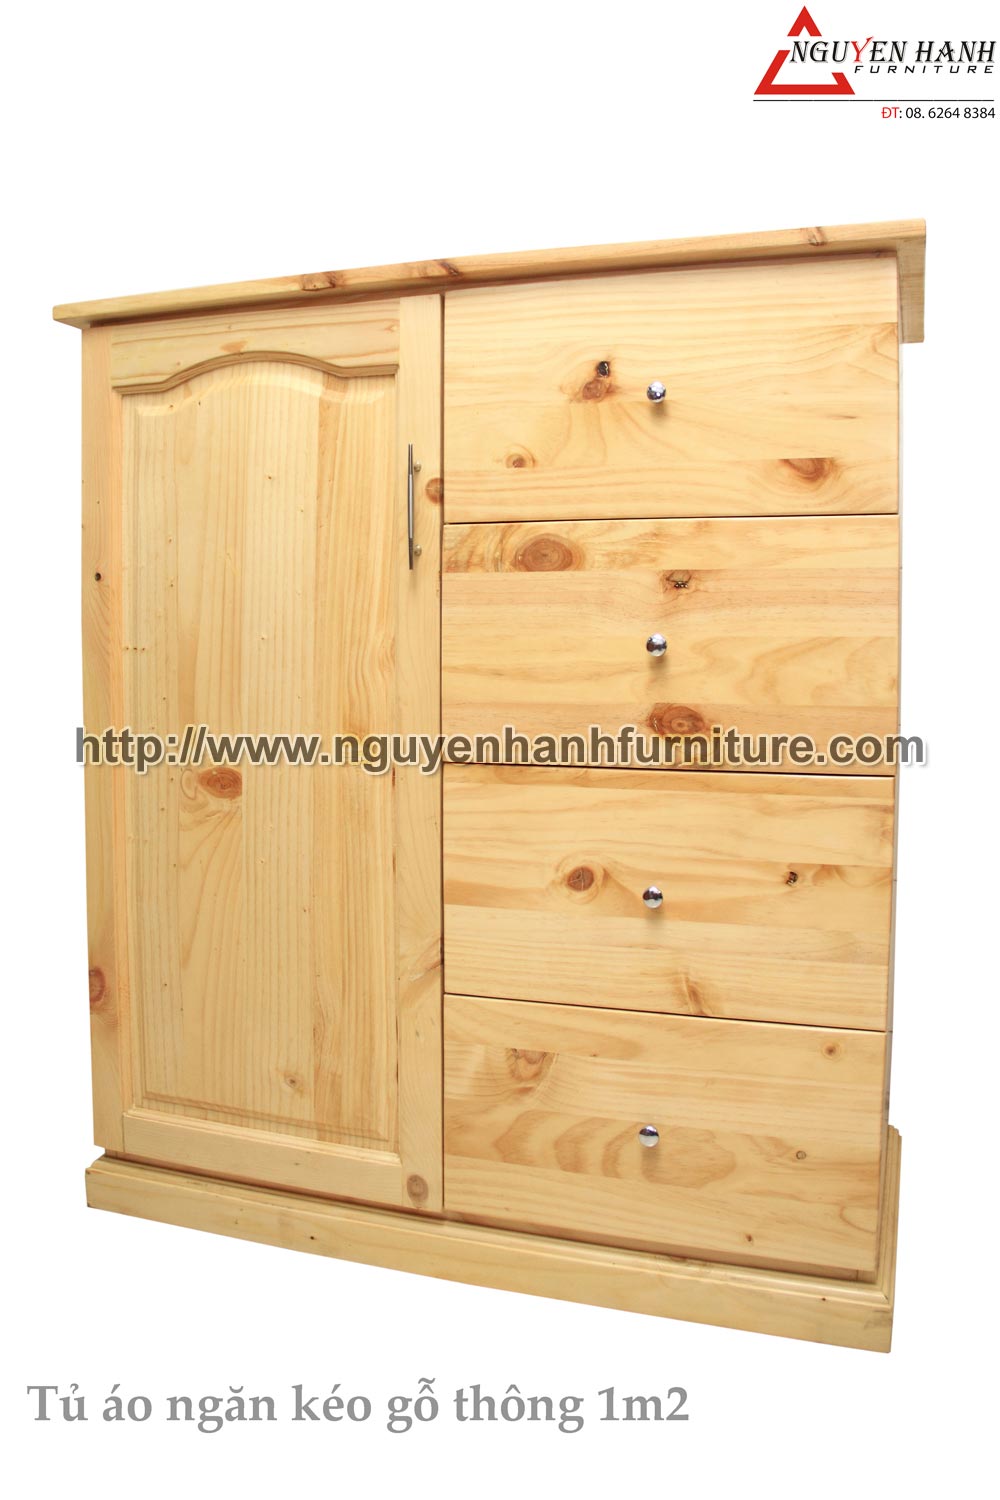 Name product: 1m2 Drawers Wardrobe of Pine wood- Dimensions: 50 x 100 x 126cm - Description: Natural pine wood